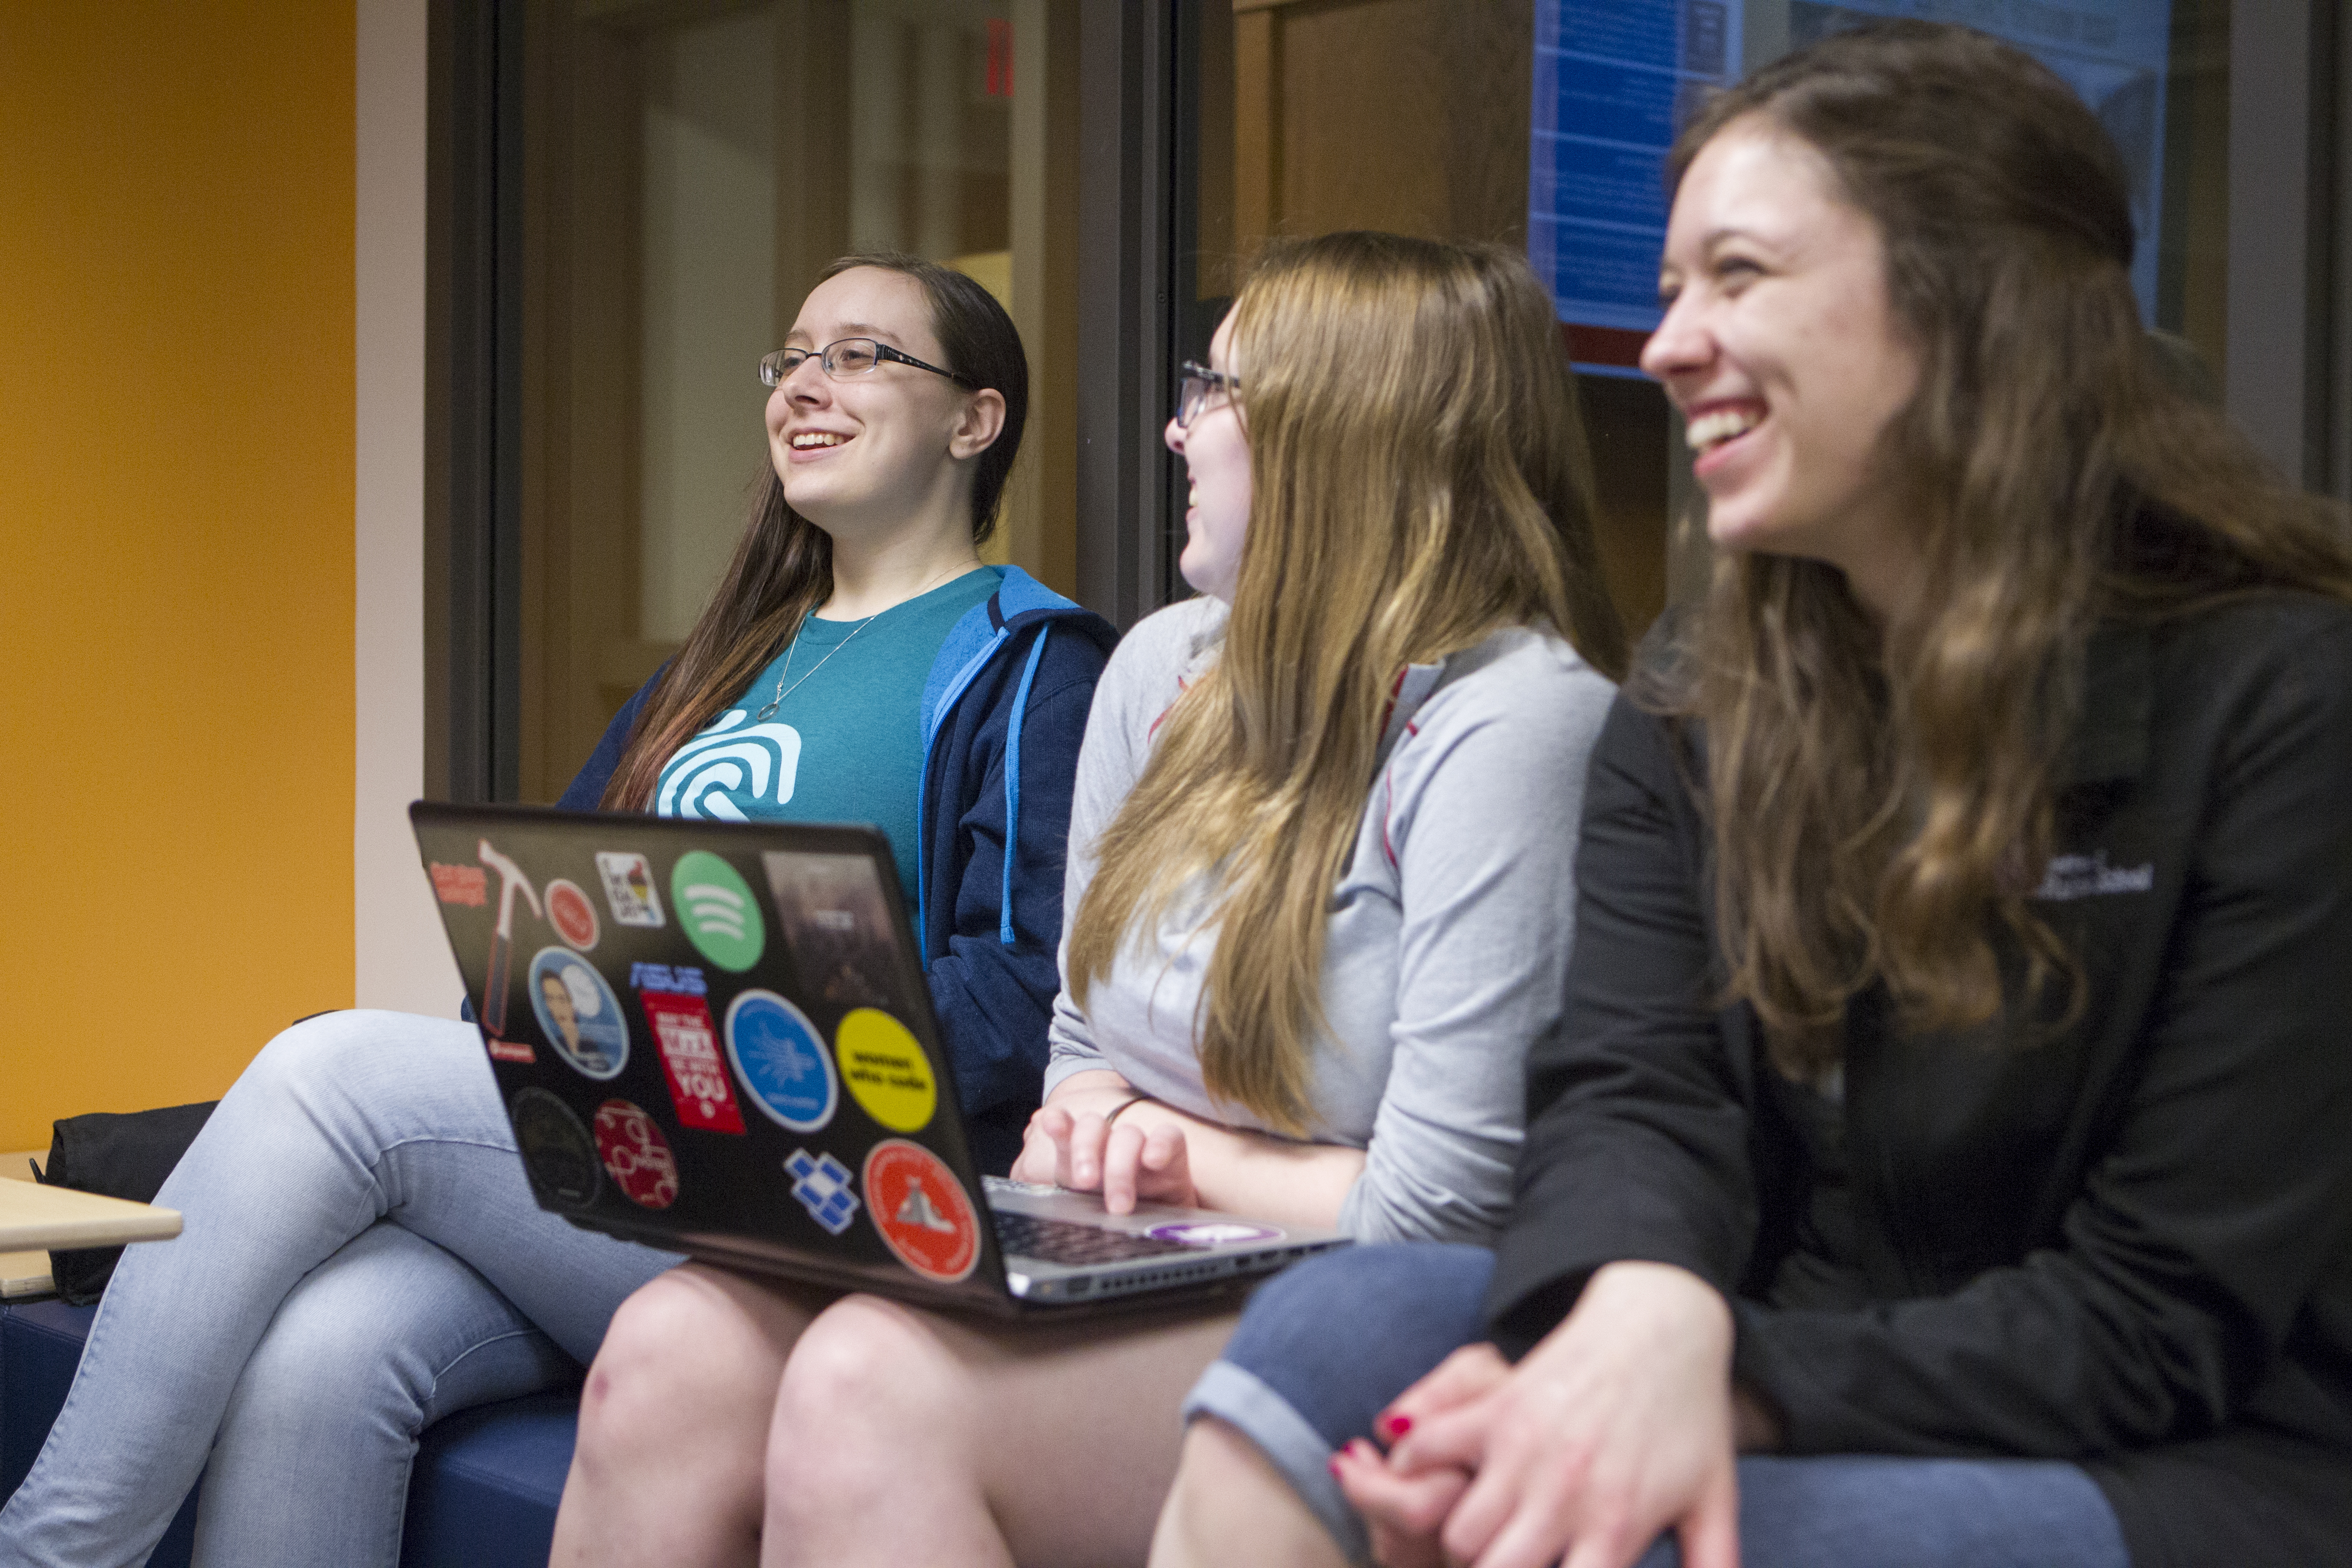 Join Computing For All at its first meeting of the semester on Thursday, Jan. 17 at 7 p.m. in Avery 19. 